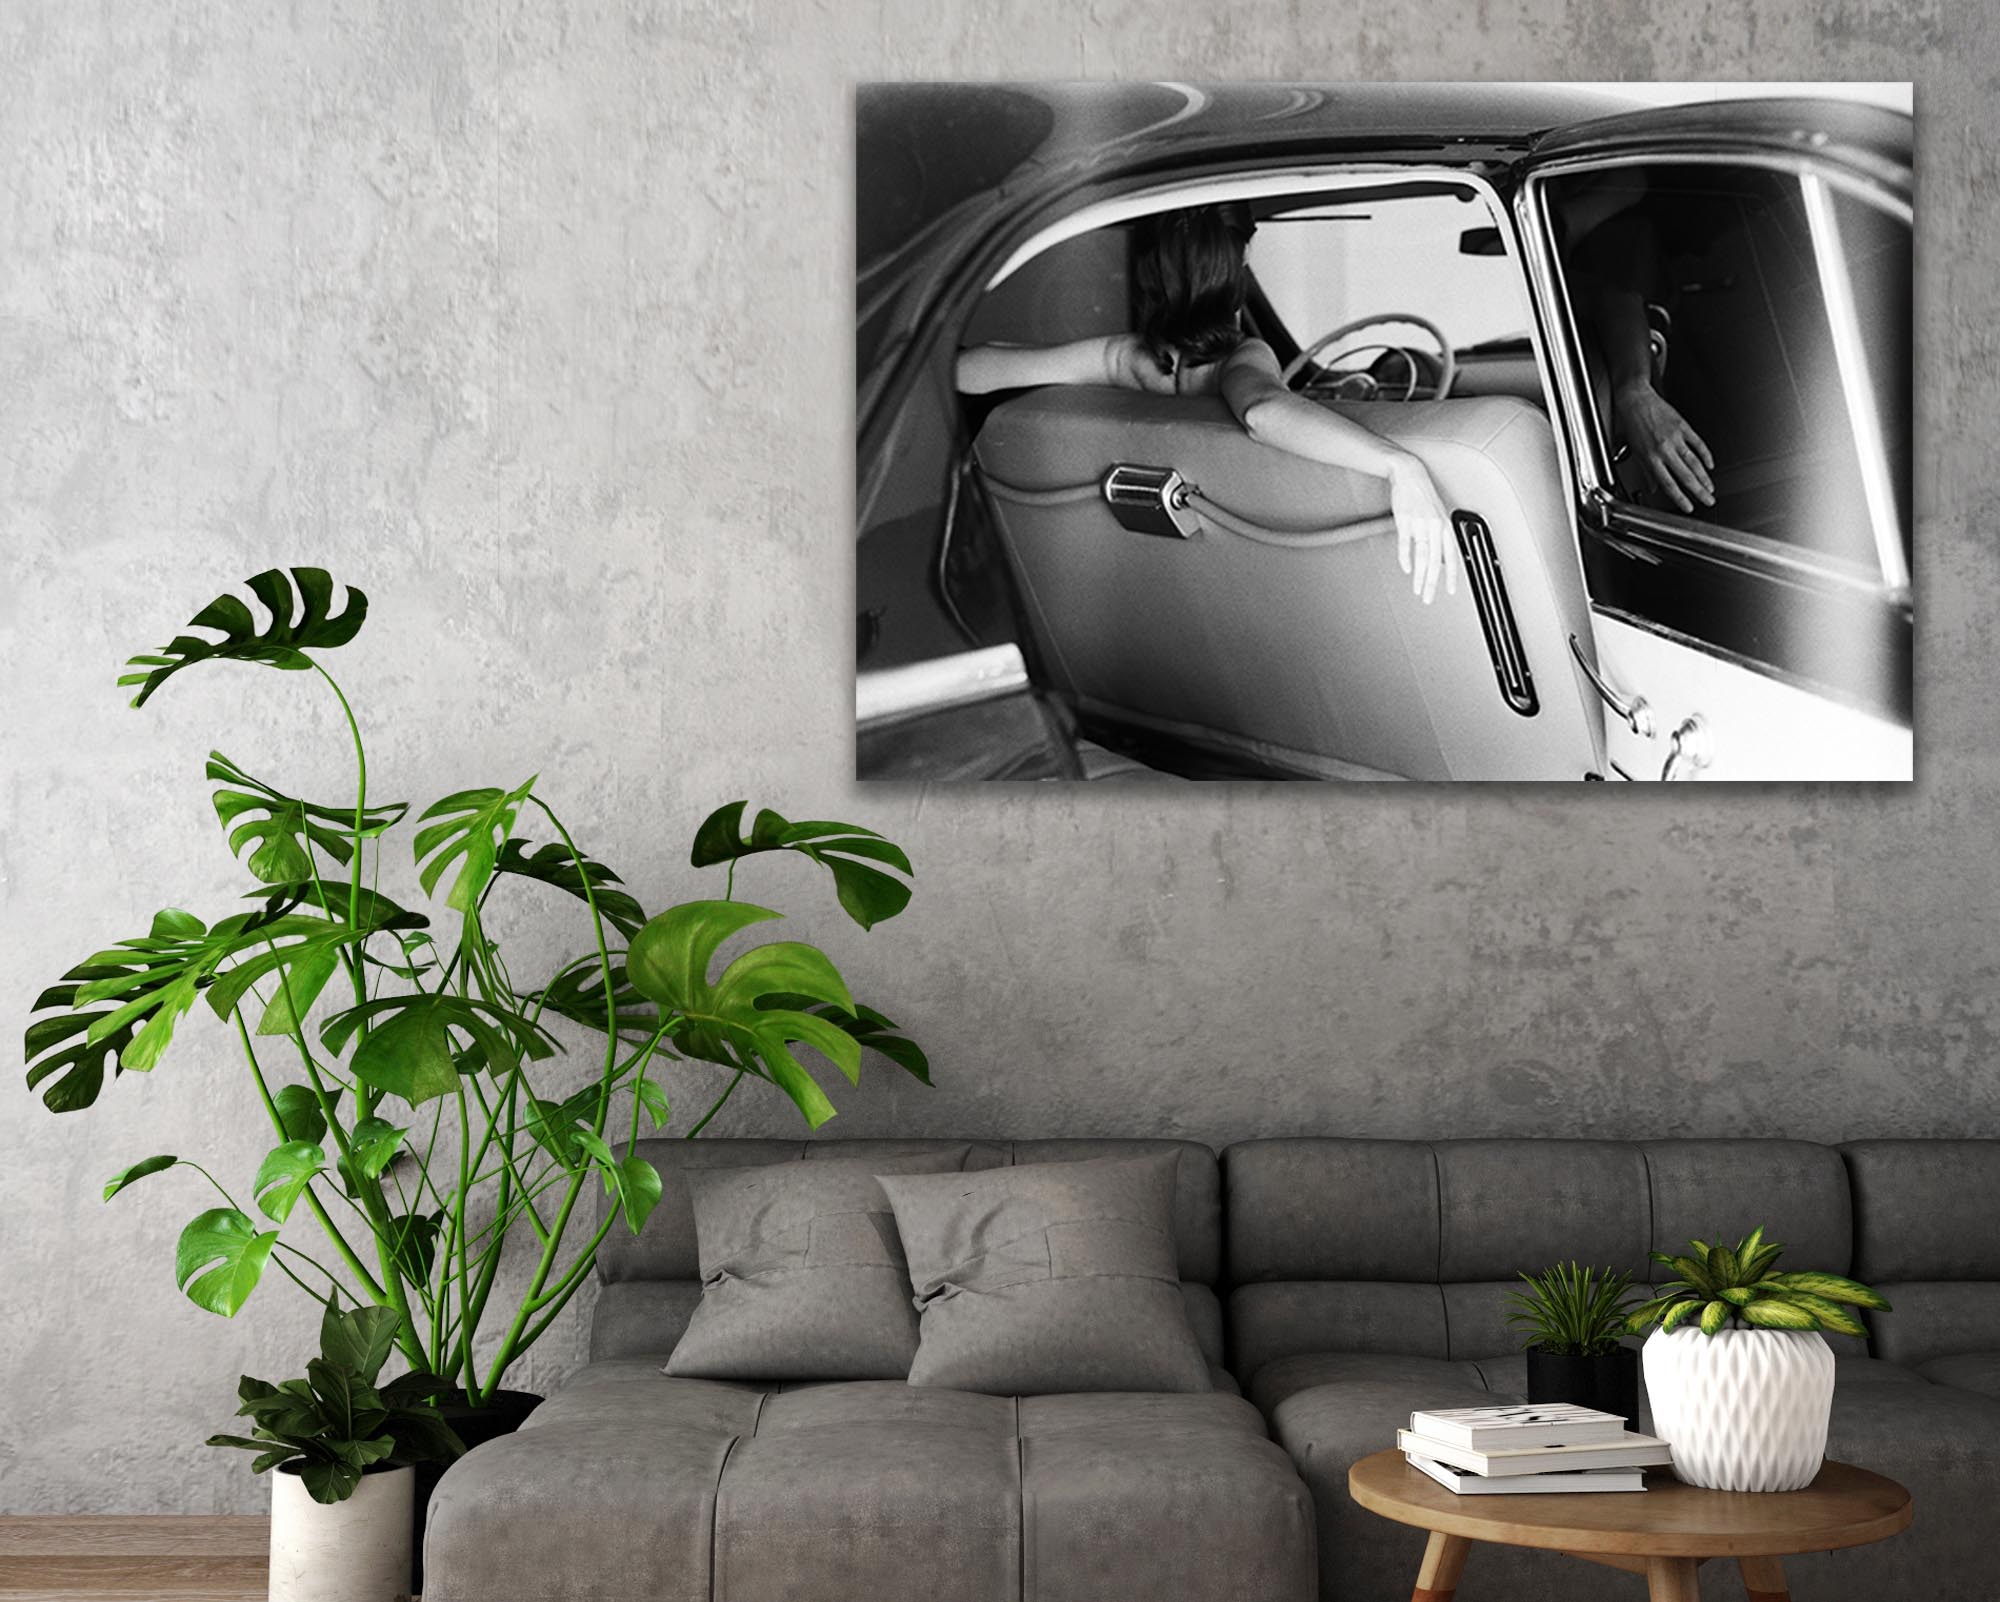 black and white acrylic face mount photo over grey couch